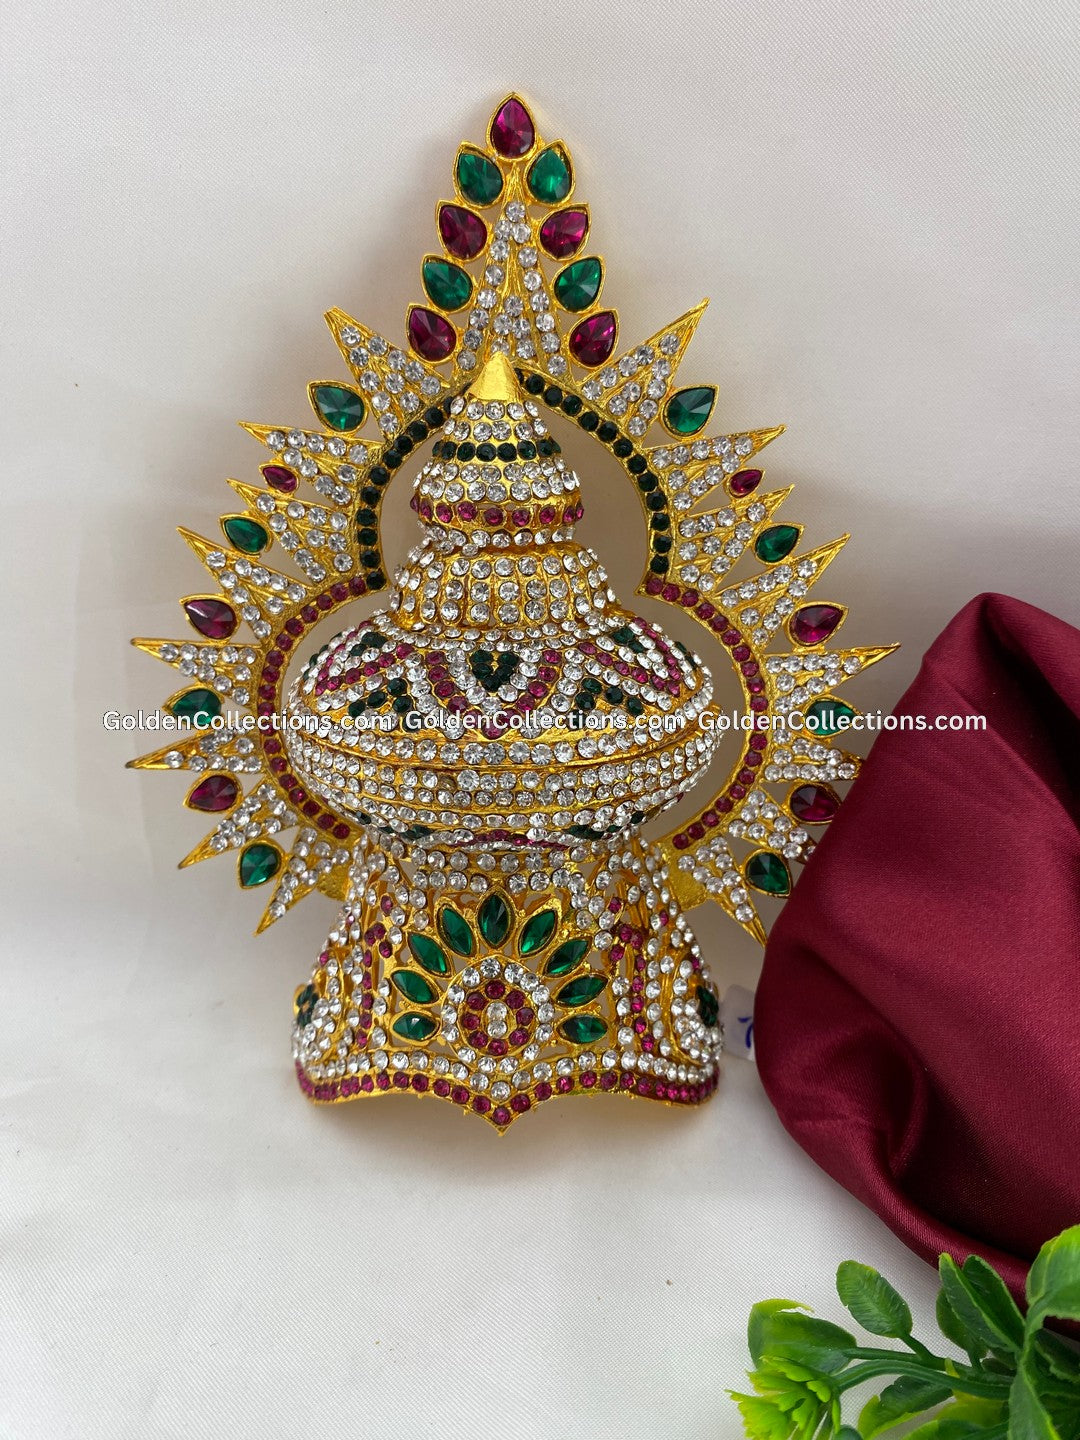 Ornate Crown for Hindu Deity - GoldenCollections DGC-097